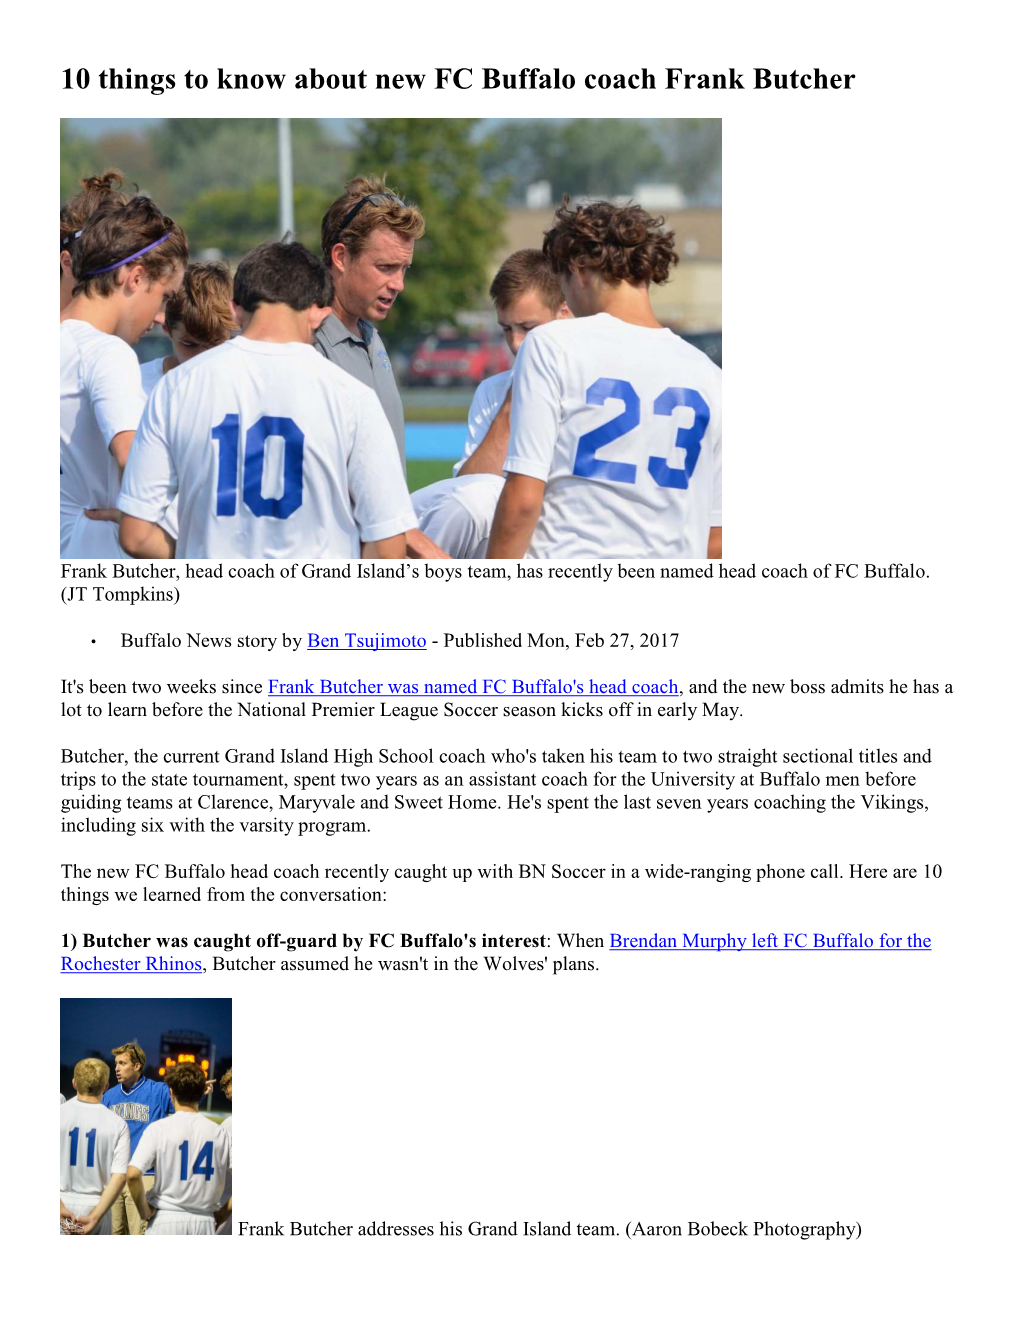 10 Things to Know About New FC Buffalo Coach Frank Butcher